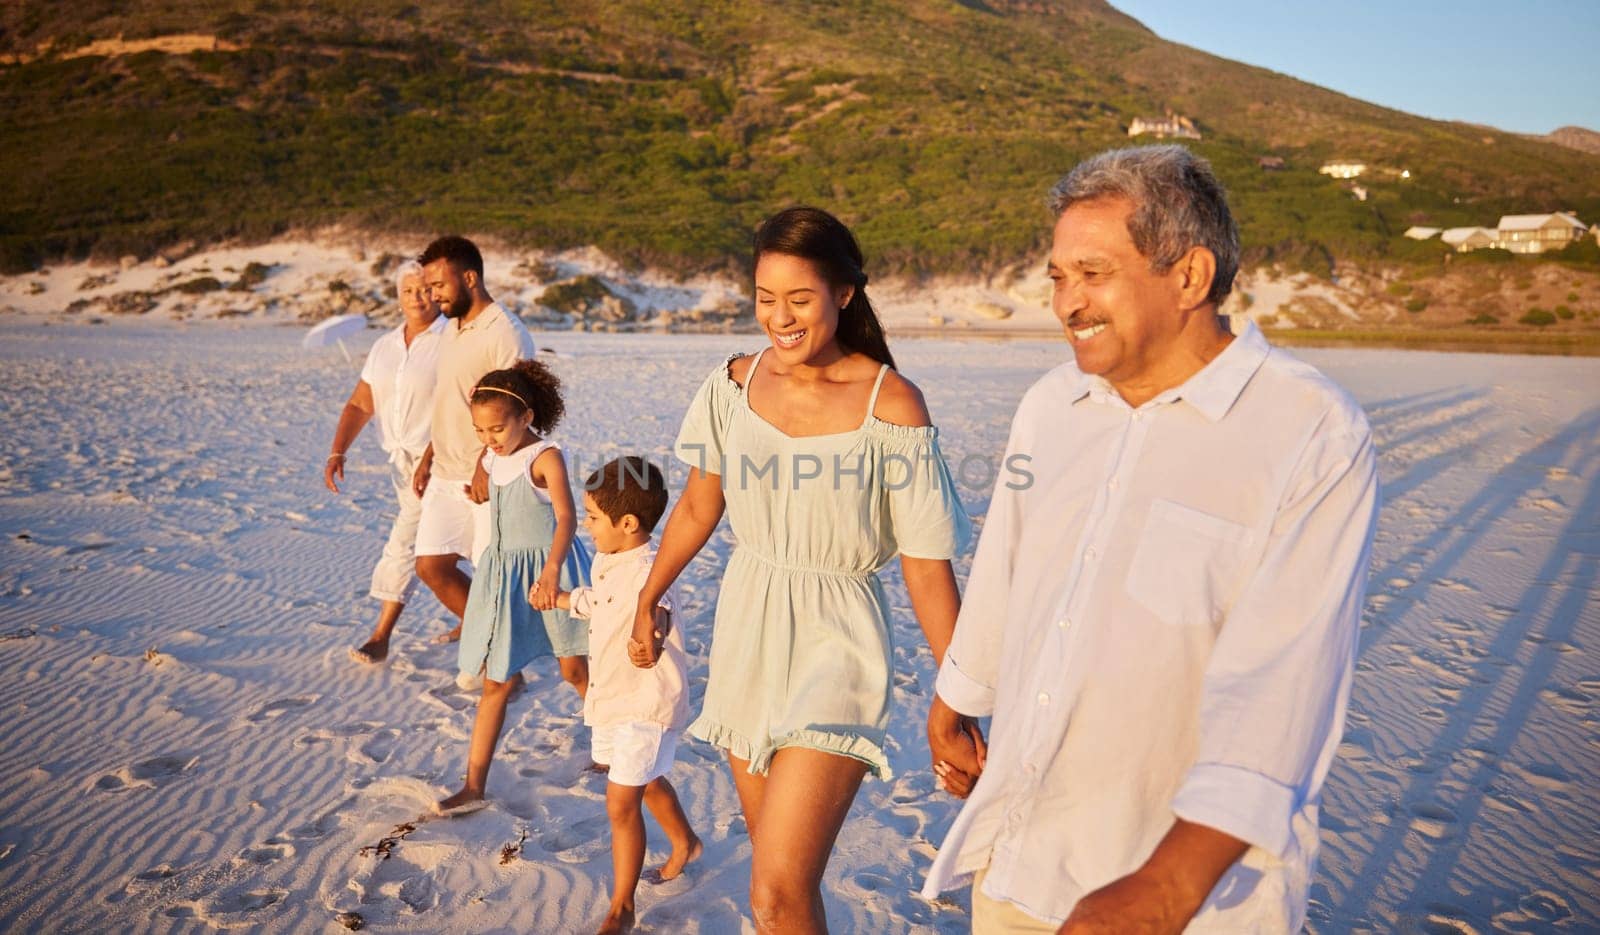 Big family, holding hands or happy kids at sea walking with grandparents on holiday vacation together. Dad, mom or children siblings bonding or smiling with grandmother or grandfather on beach sand.